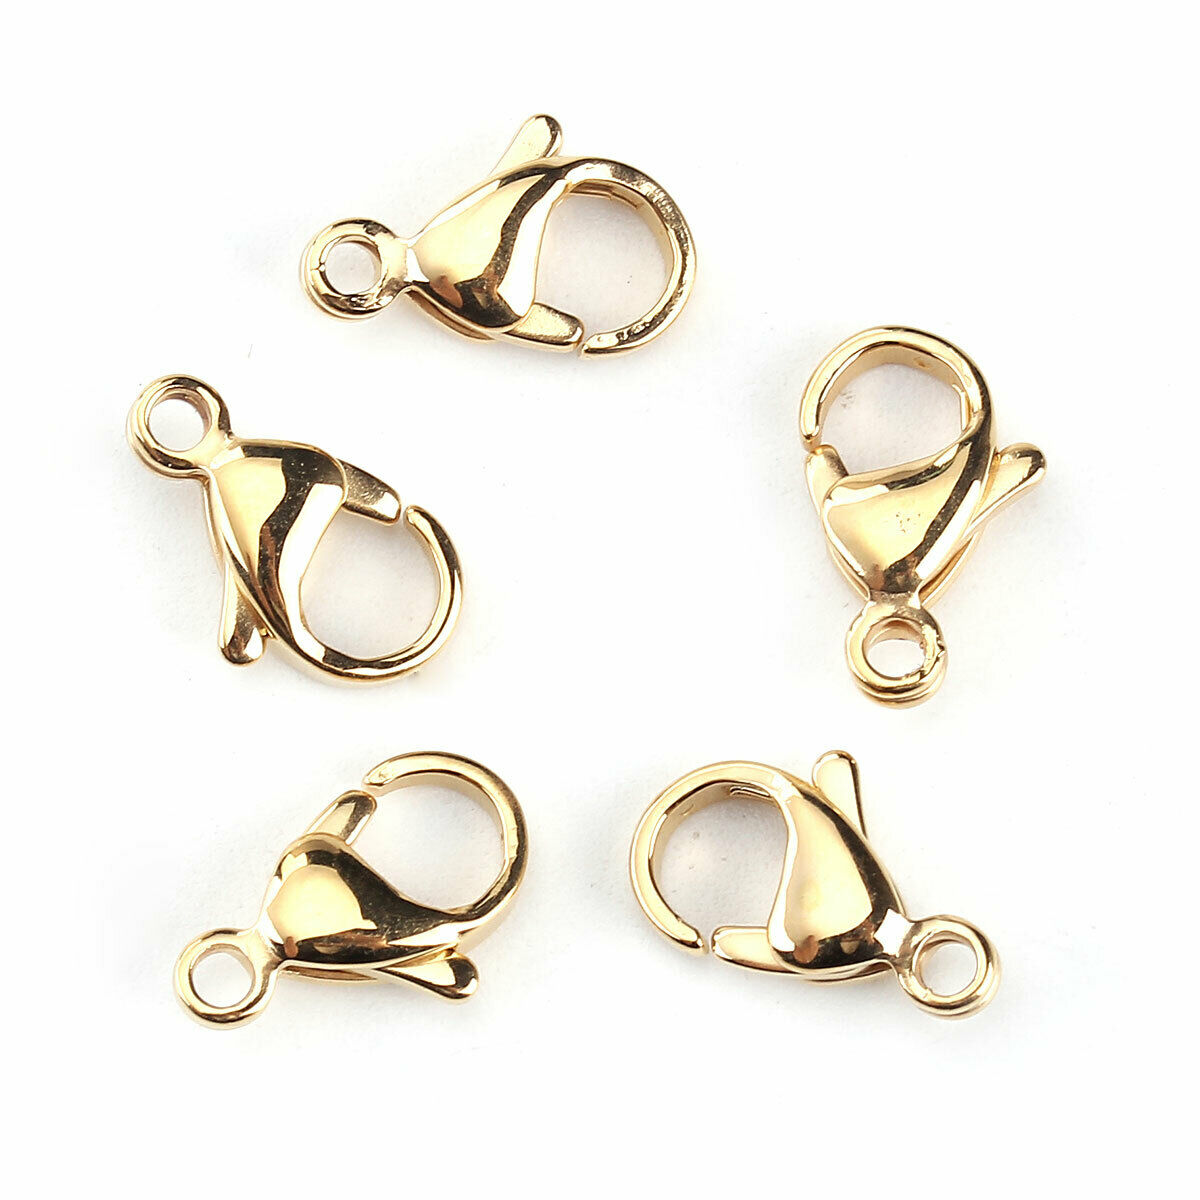 5 Stainless Steel Large Lobster Clasp Findings Gold Plated 13x8mm( 4/8"x3")